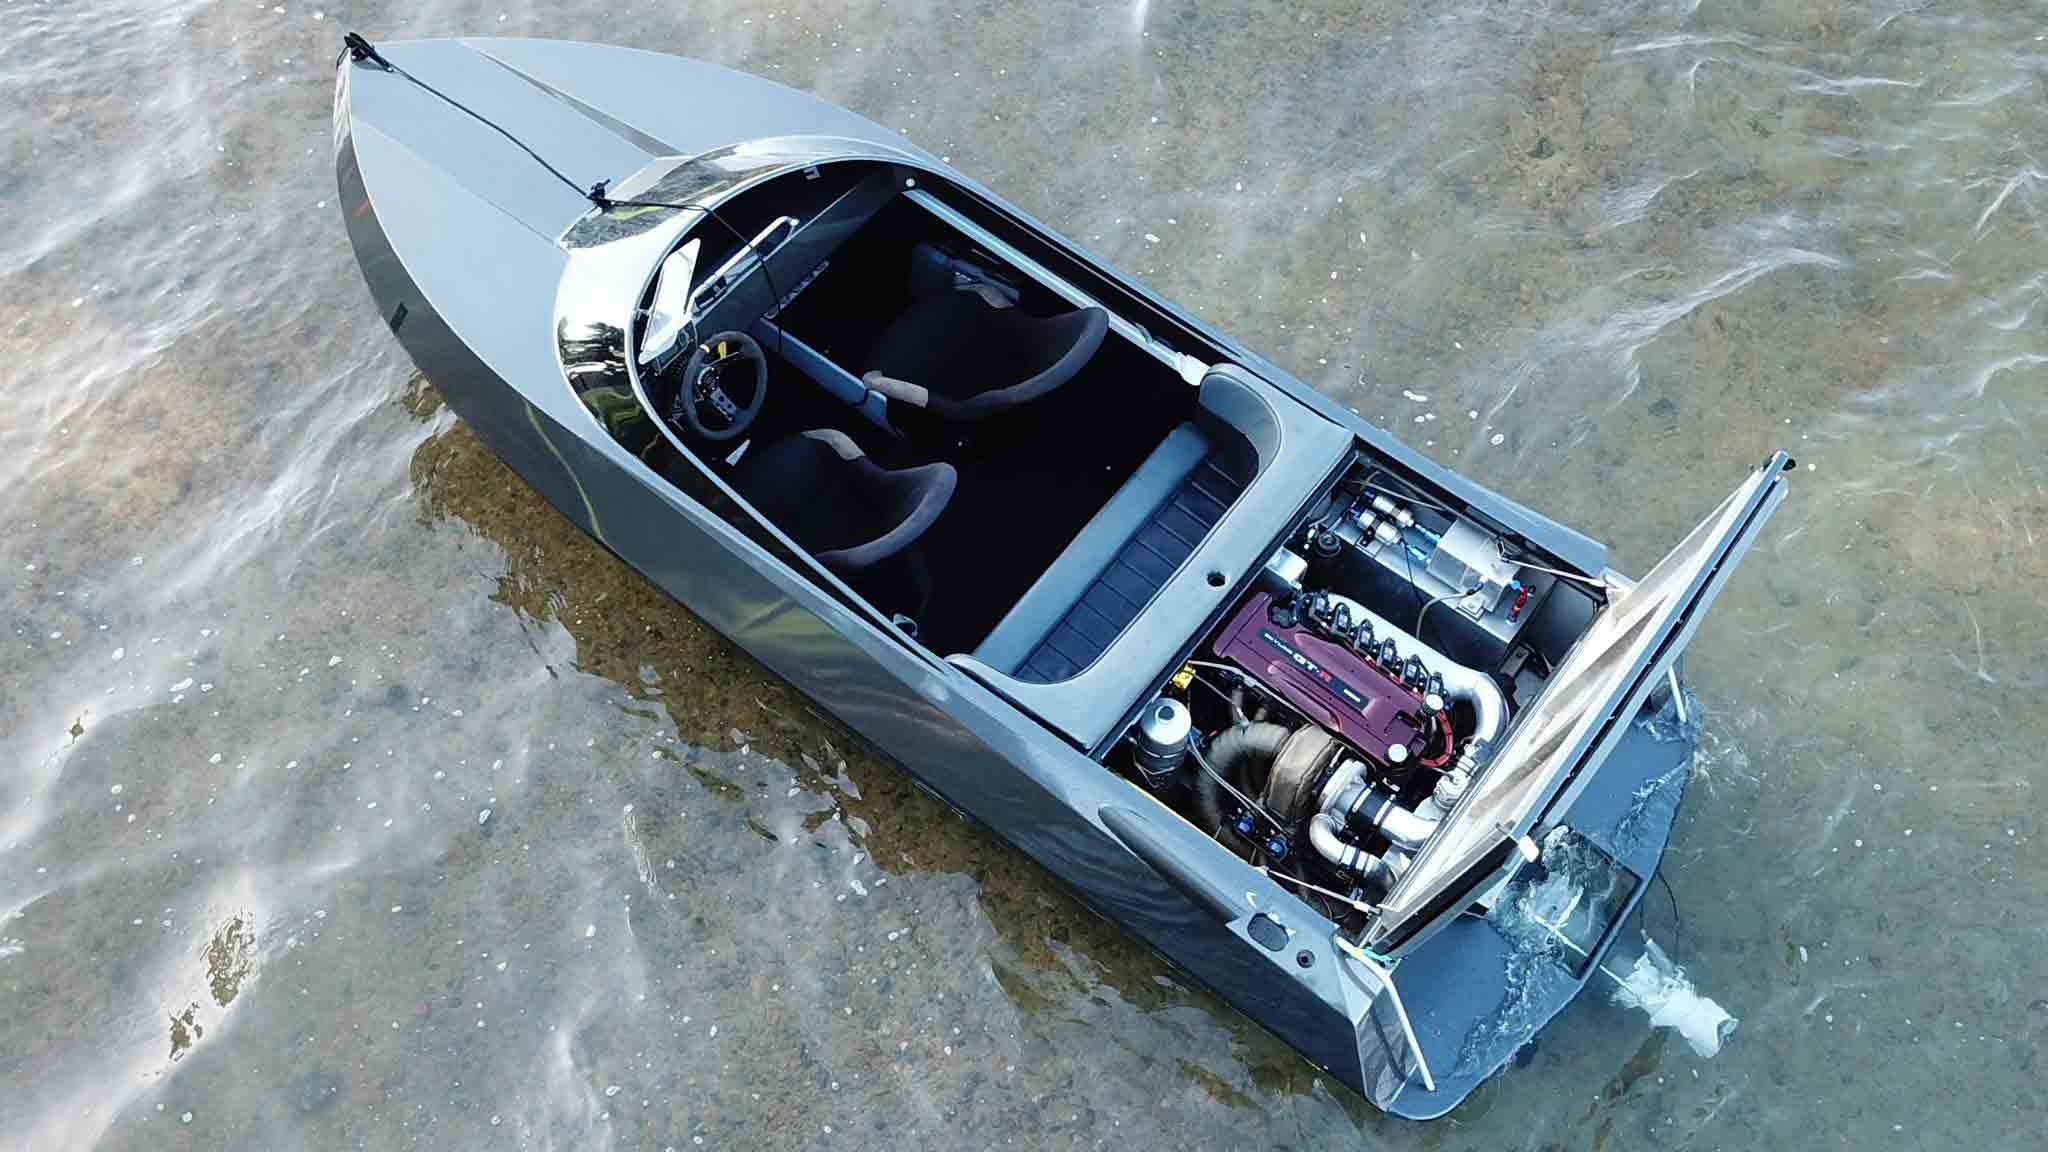 Silver jet boat floats with RB30/26 Nissan Skyline car engine exposed under the engine cover